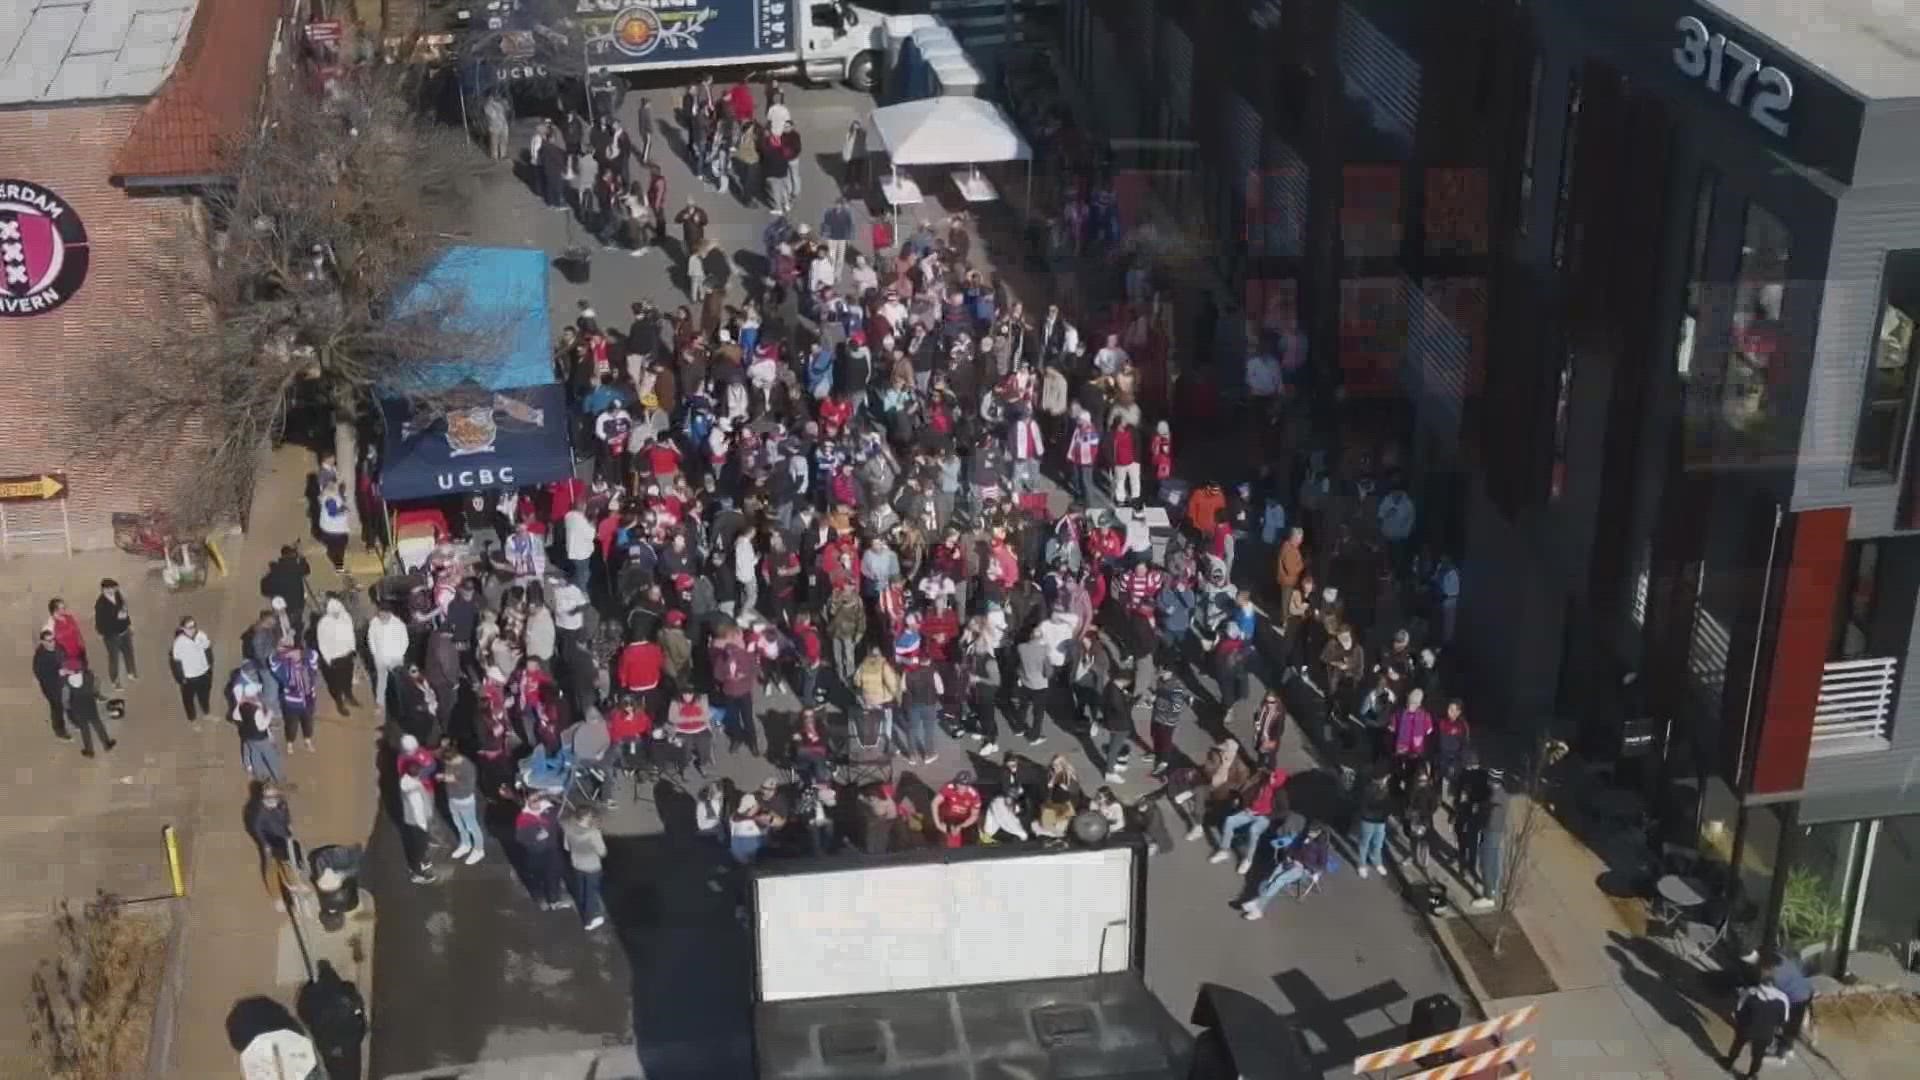 Fans of Team USA packed the street outside Amsterdam Tavern Friday to celebrate the World Cup match between the USA and England.